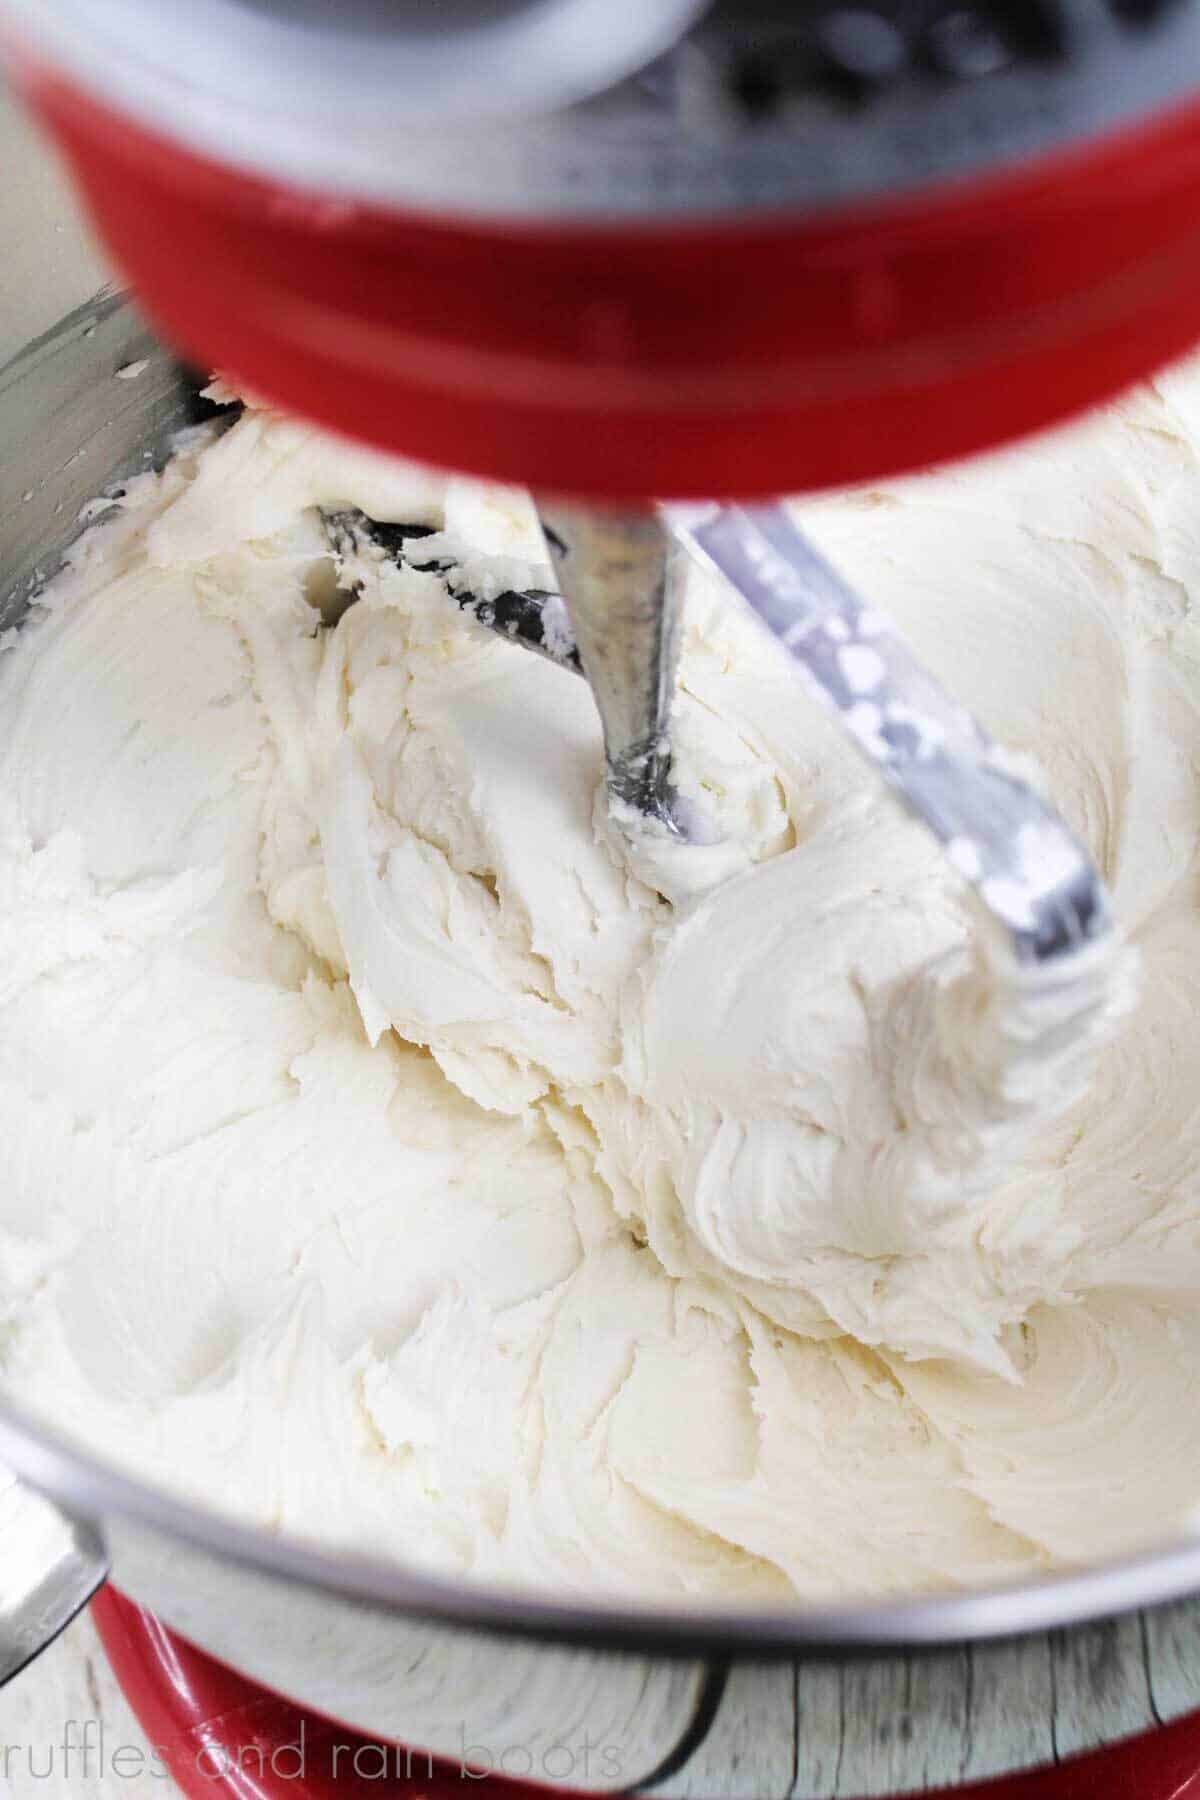 Vertical image of red stand mixer and paddle combining cream into the buttercream frosting recipe.